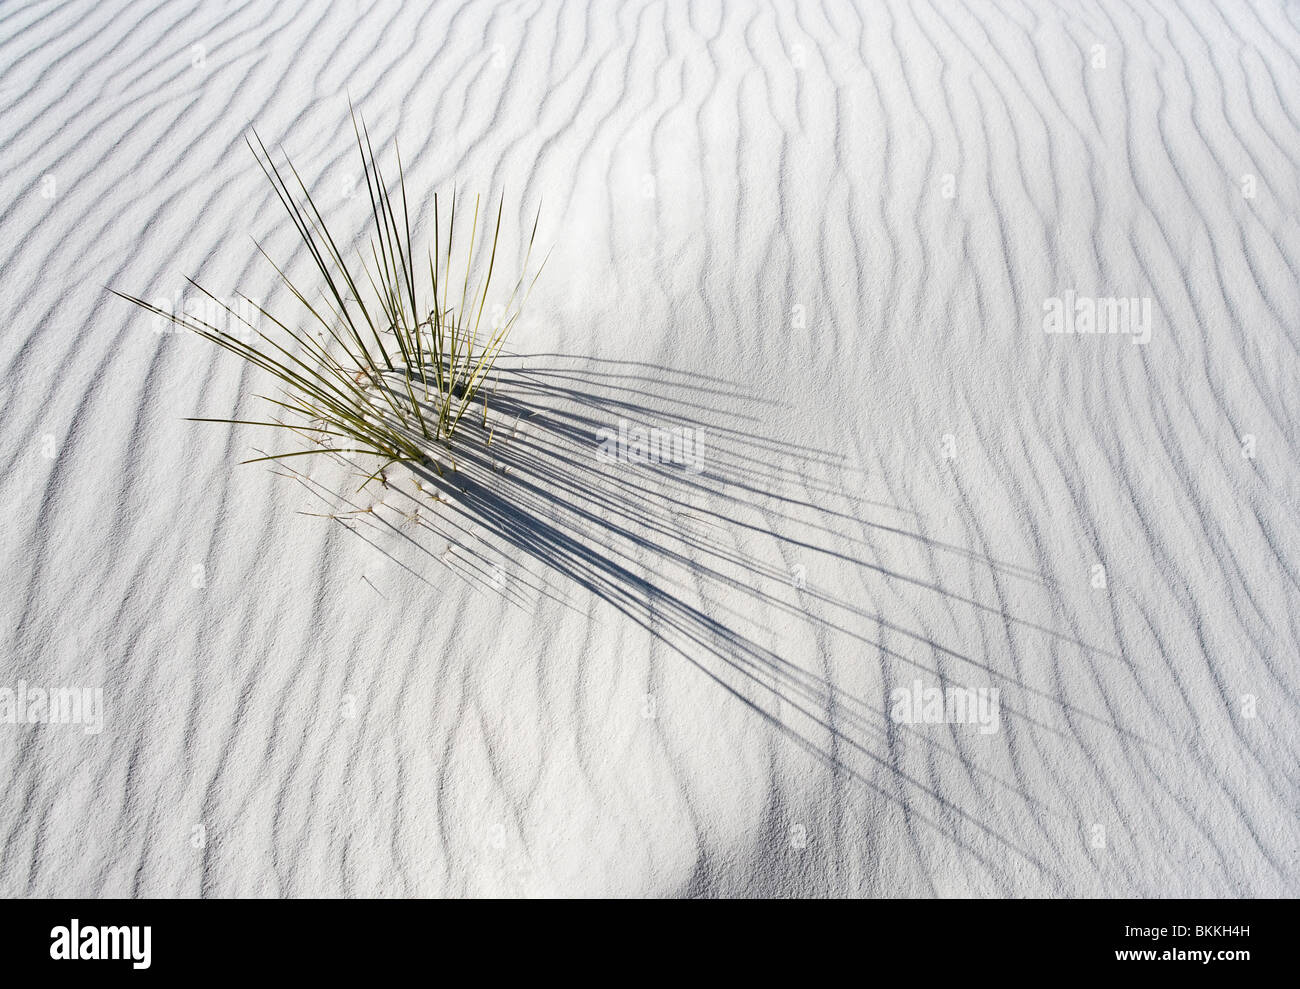 A yucca plant getting buried in a white sand dune at White Sands National Monument, New Mexico. Stock Photo